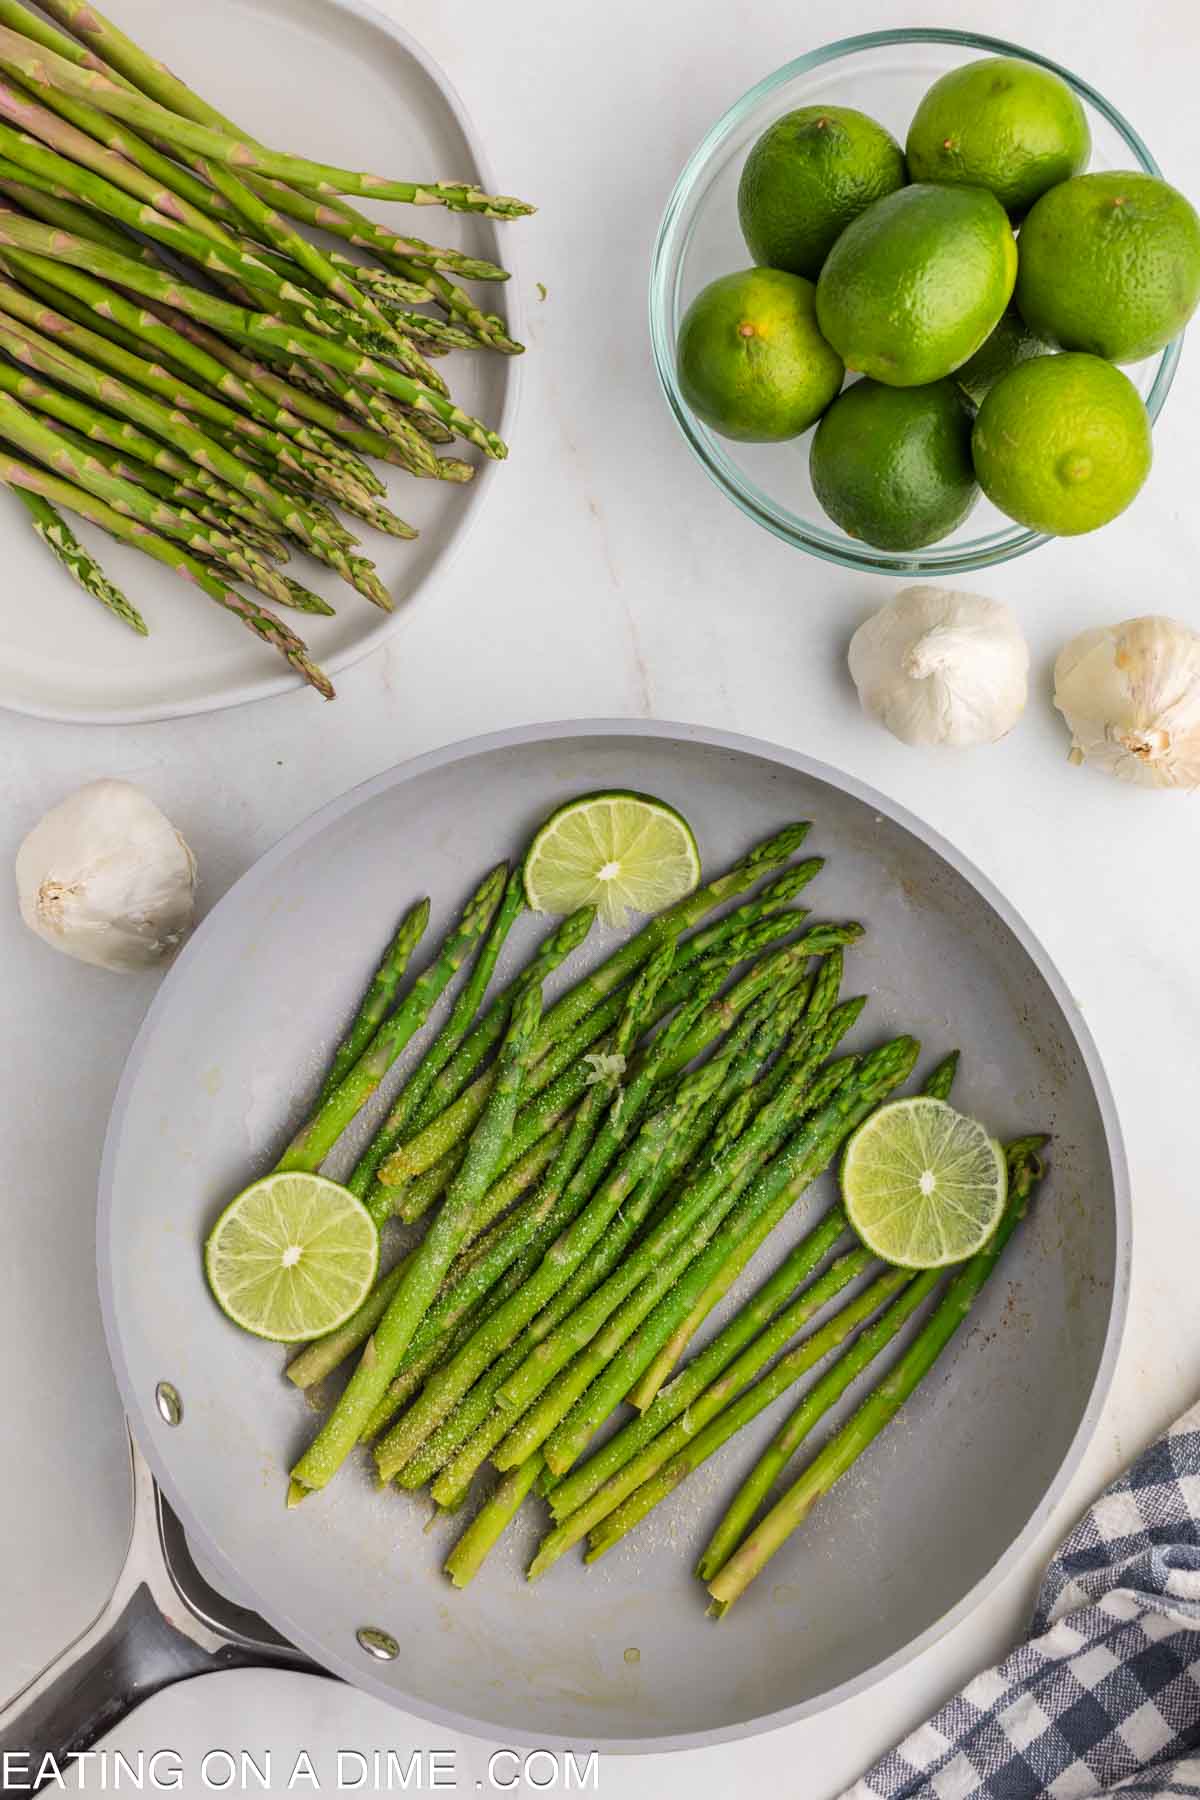 Steamed asparagus in a skillet topped with fresh limes